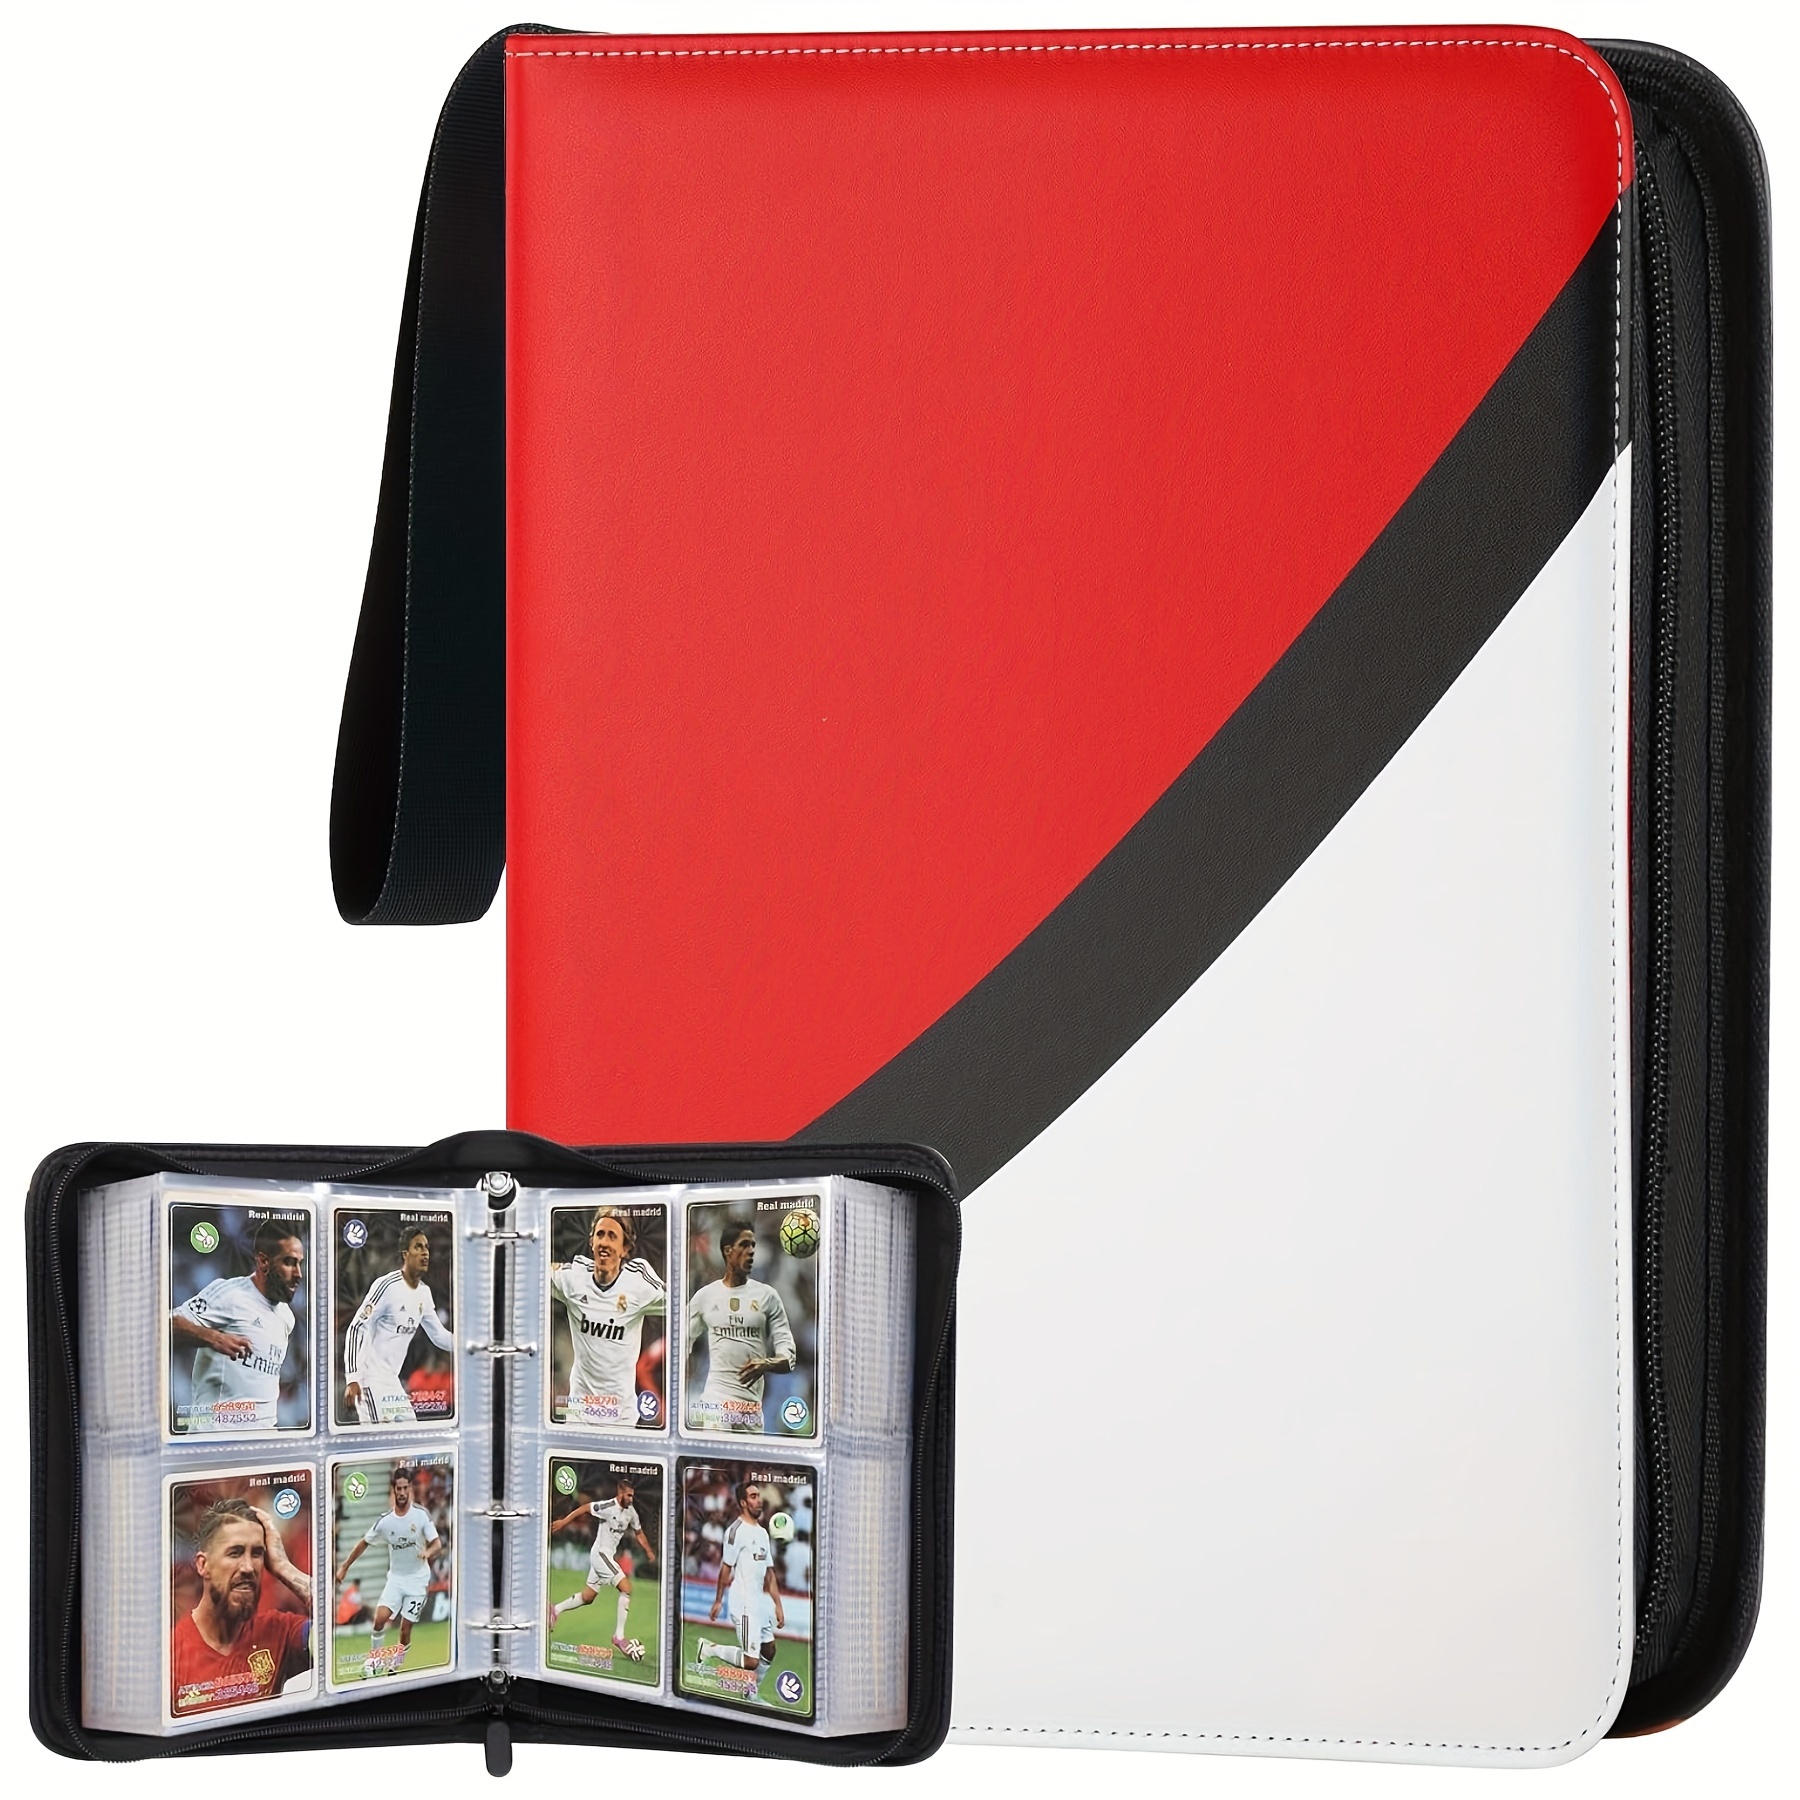 

Card Binder Card Binder With 4 Pockets, Compatible With Cards, 4 Pocket Page Sleeves Can Hold 400 Cards. Trading Card Binder With Sleeves, Card Sleeve Collector